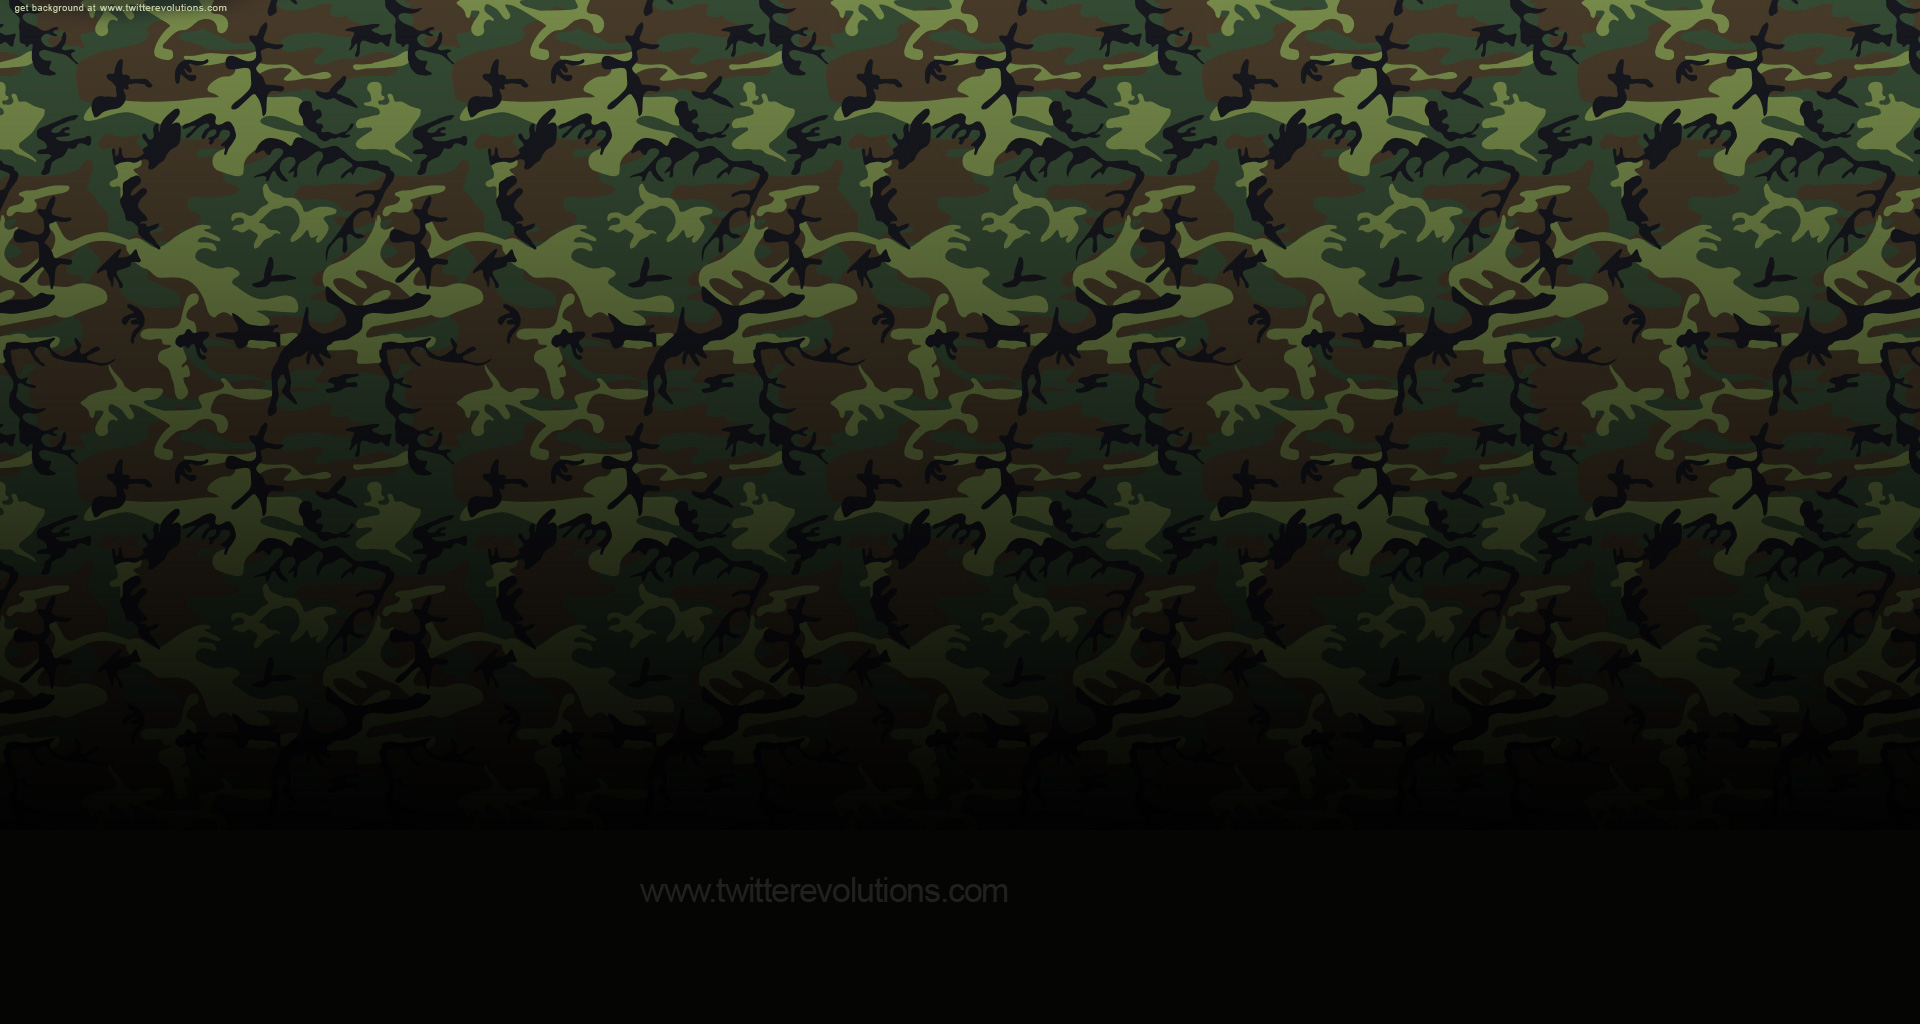 Twitter marine corps camouflage background   Twitterevolutions